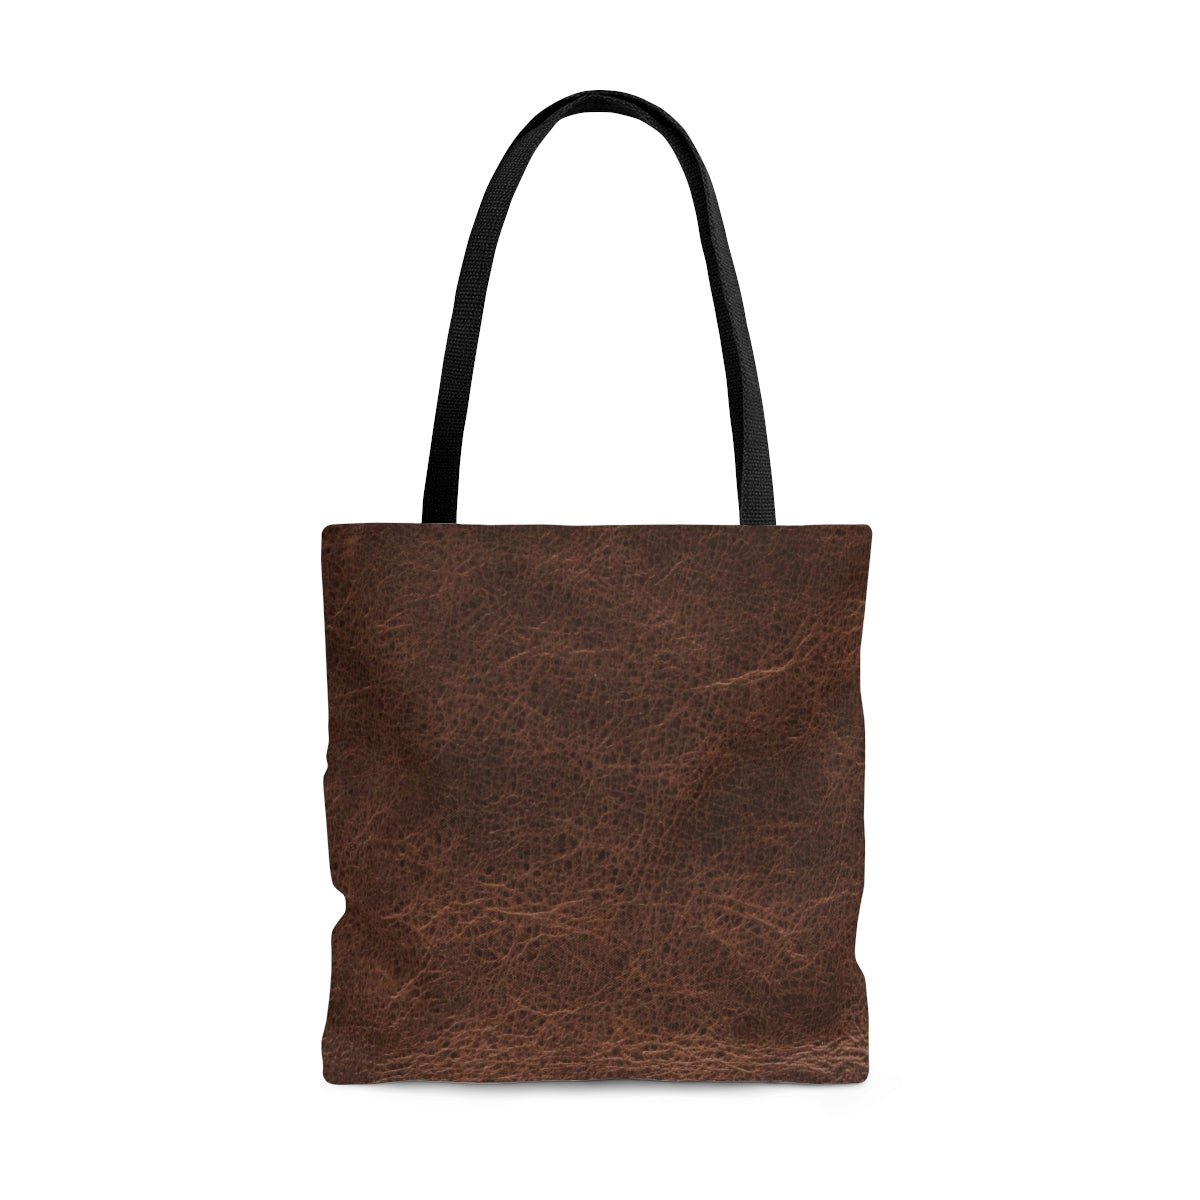 LEATHERTONE [BROWN] Tote Bag | CANAANWEAR | Bags | All Over Print